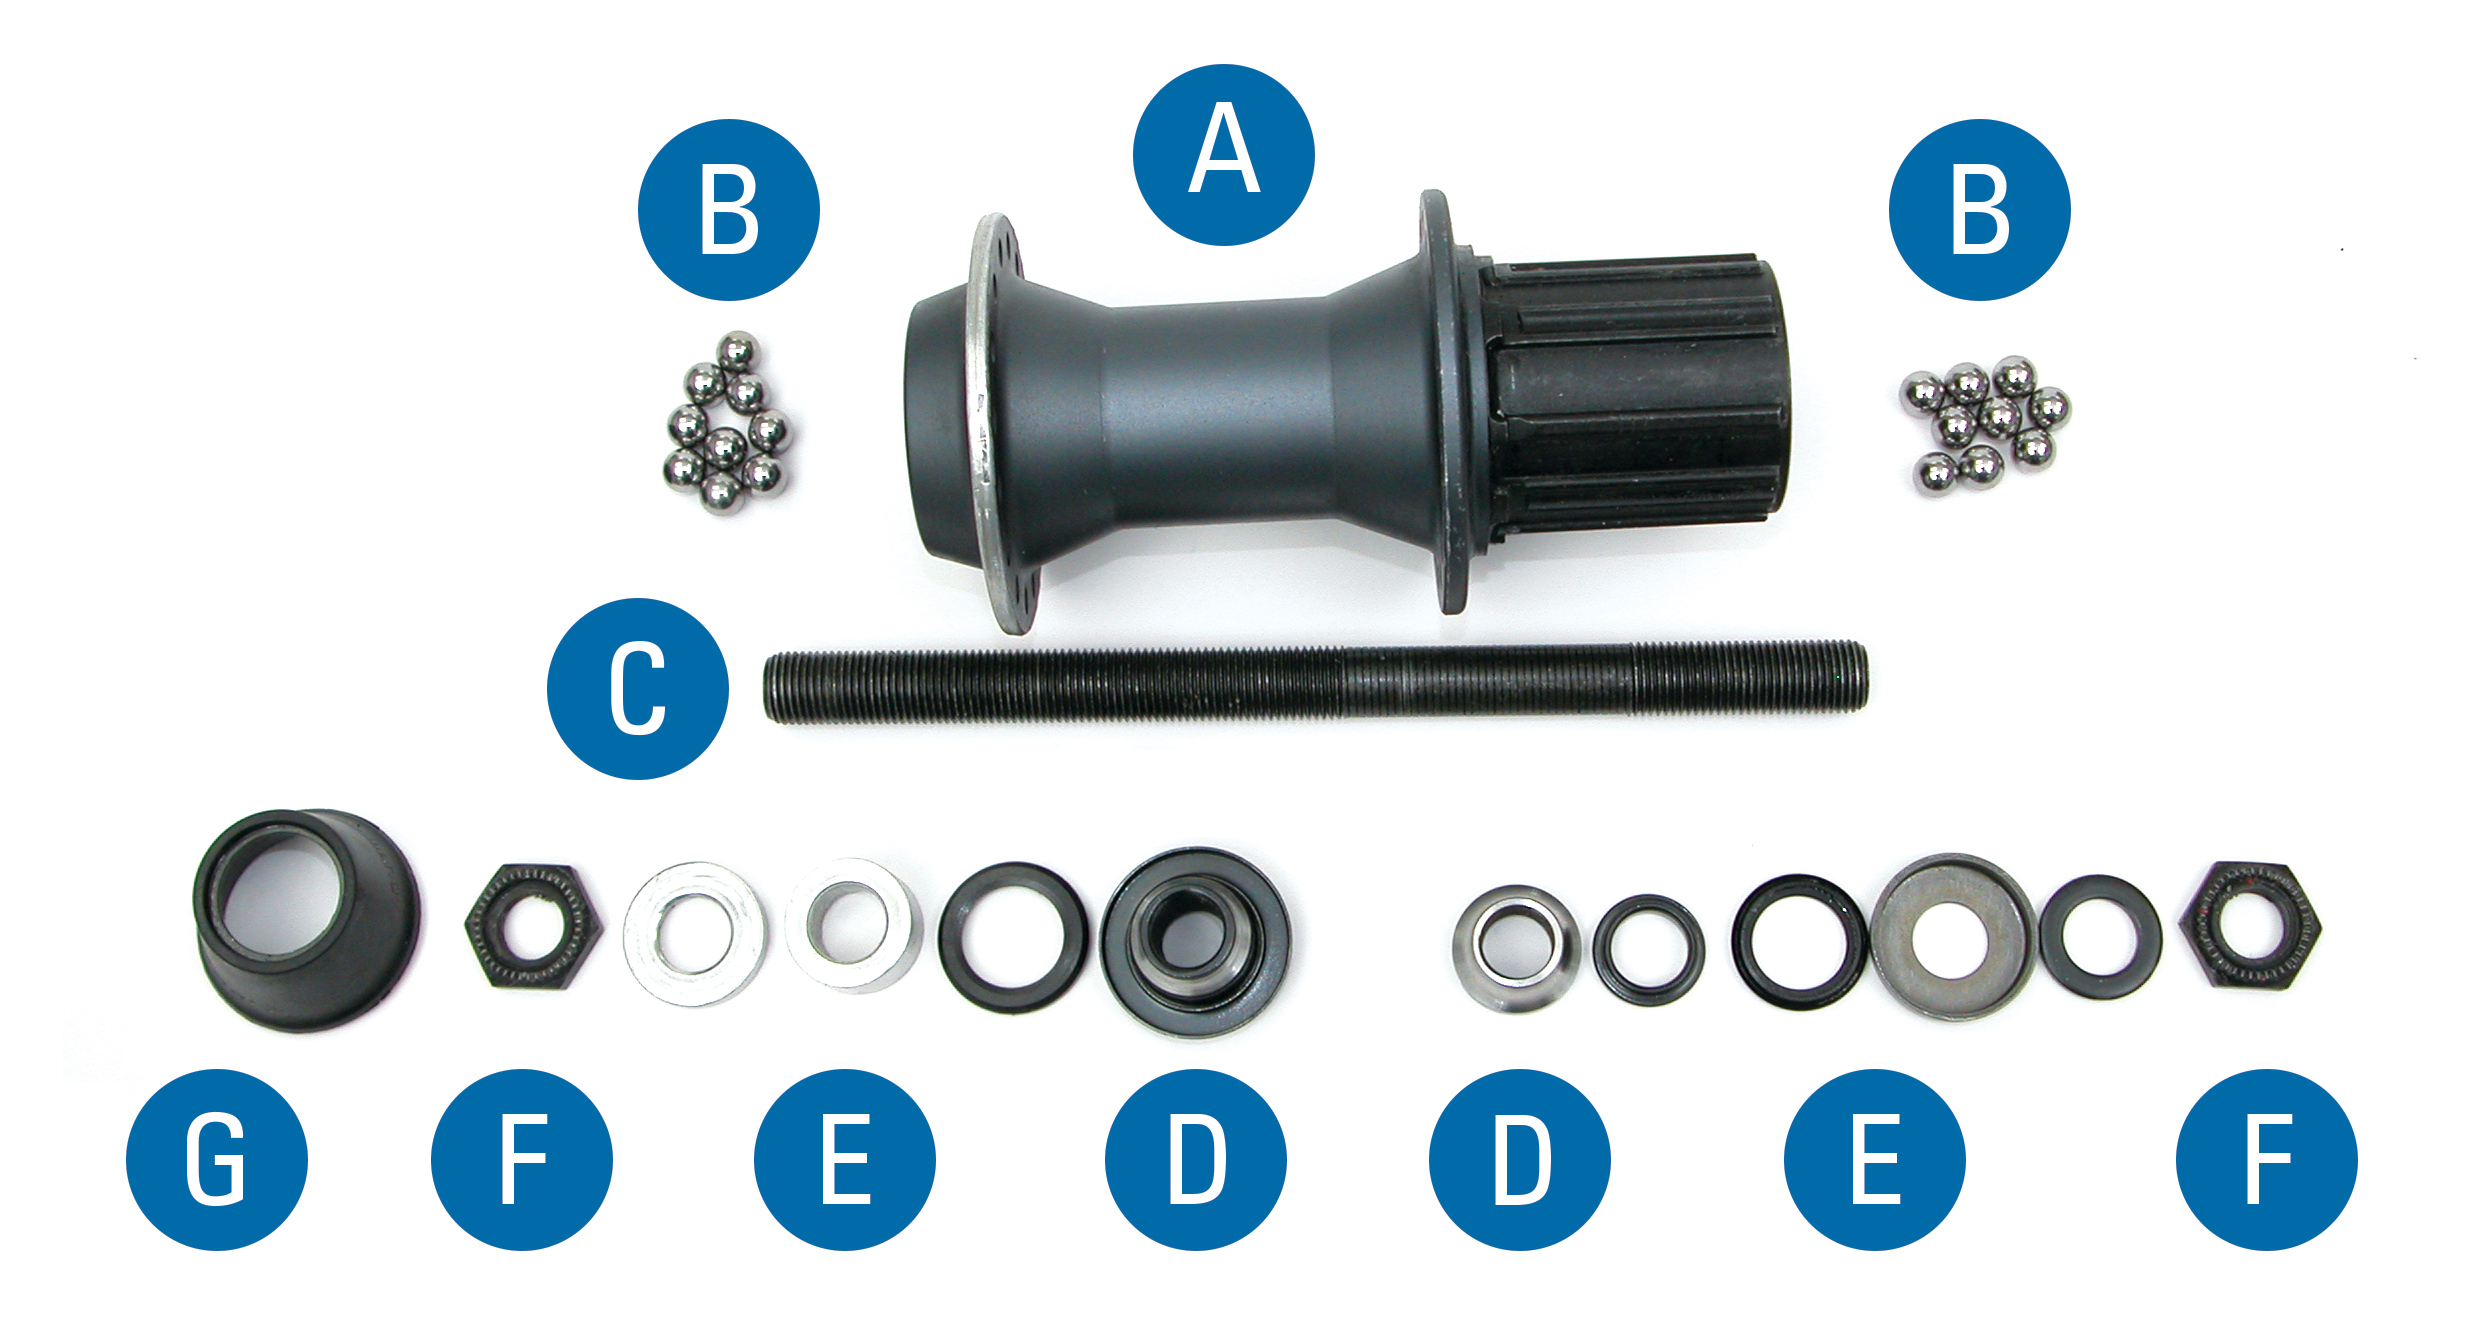 Parts of a common Shimano® rear hub: (A) Hub shell, (B) Ball Bearings, (C) Axle, (D) Cones, (E) Washers/Spacers, (F) Locknuts, (G) Rubber Seal